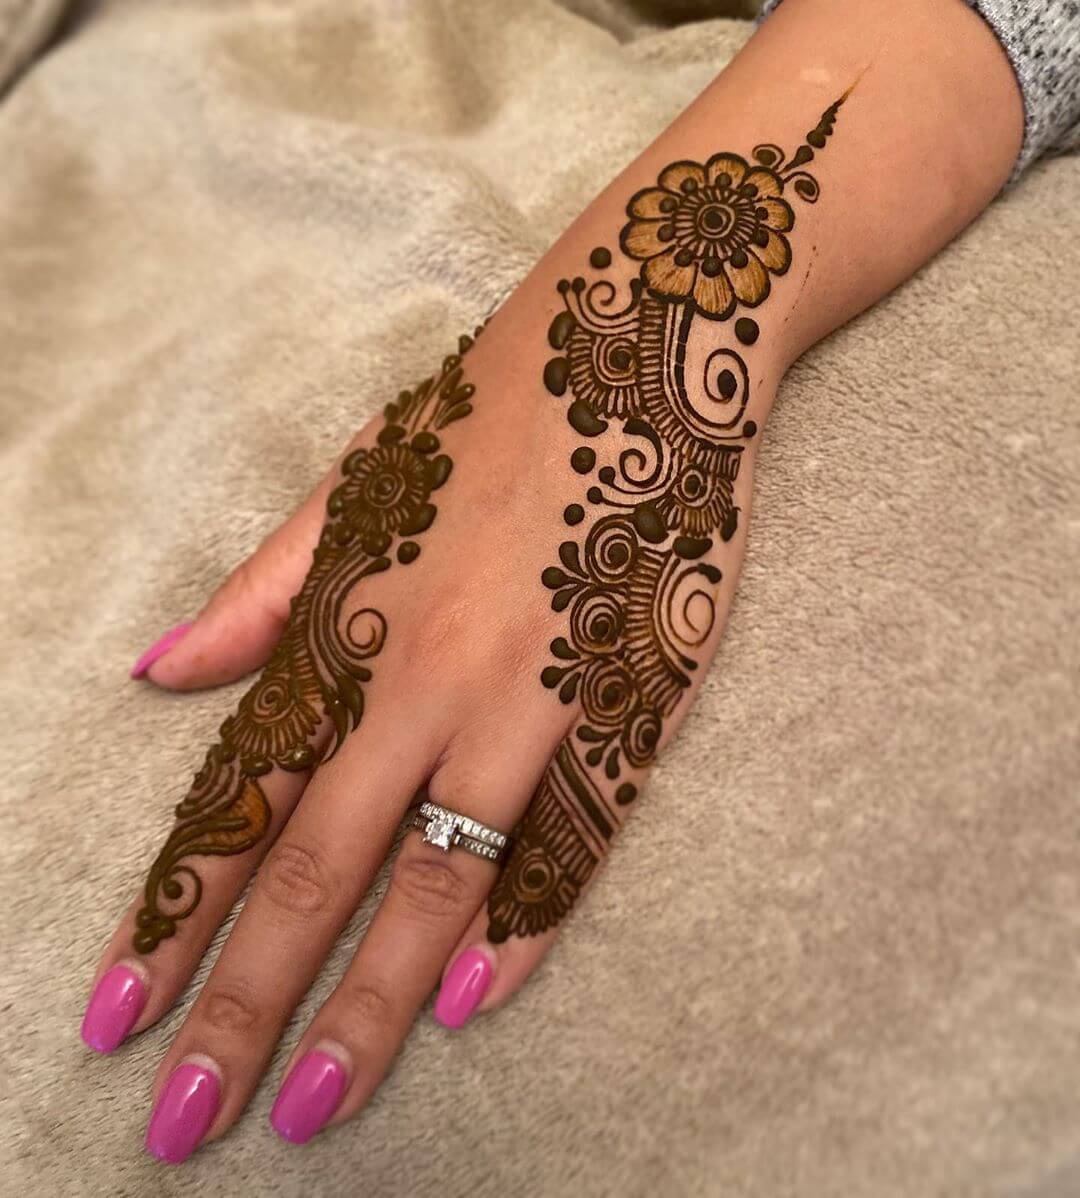 The Mid-spaced Design Simple Arabic Mehndi Designs for Left Hand